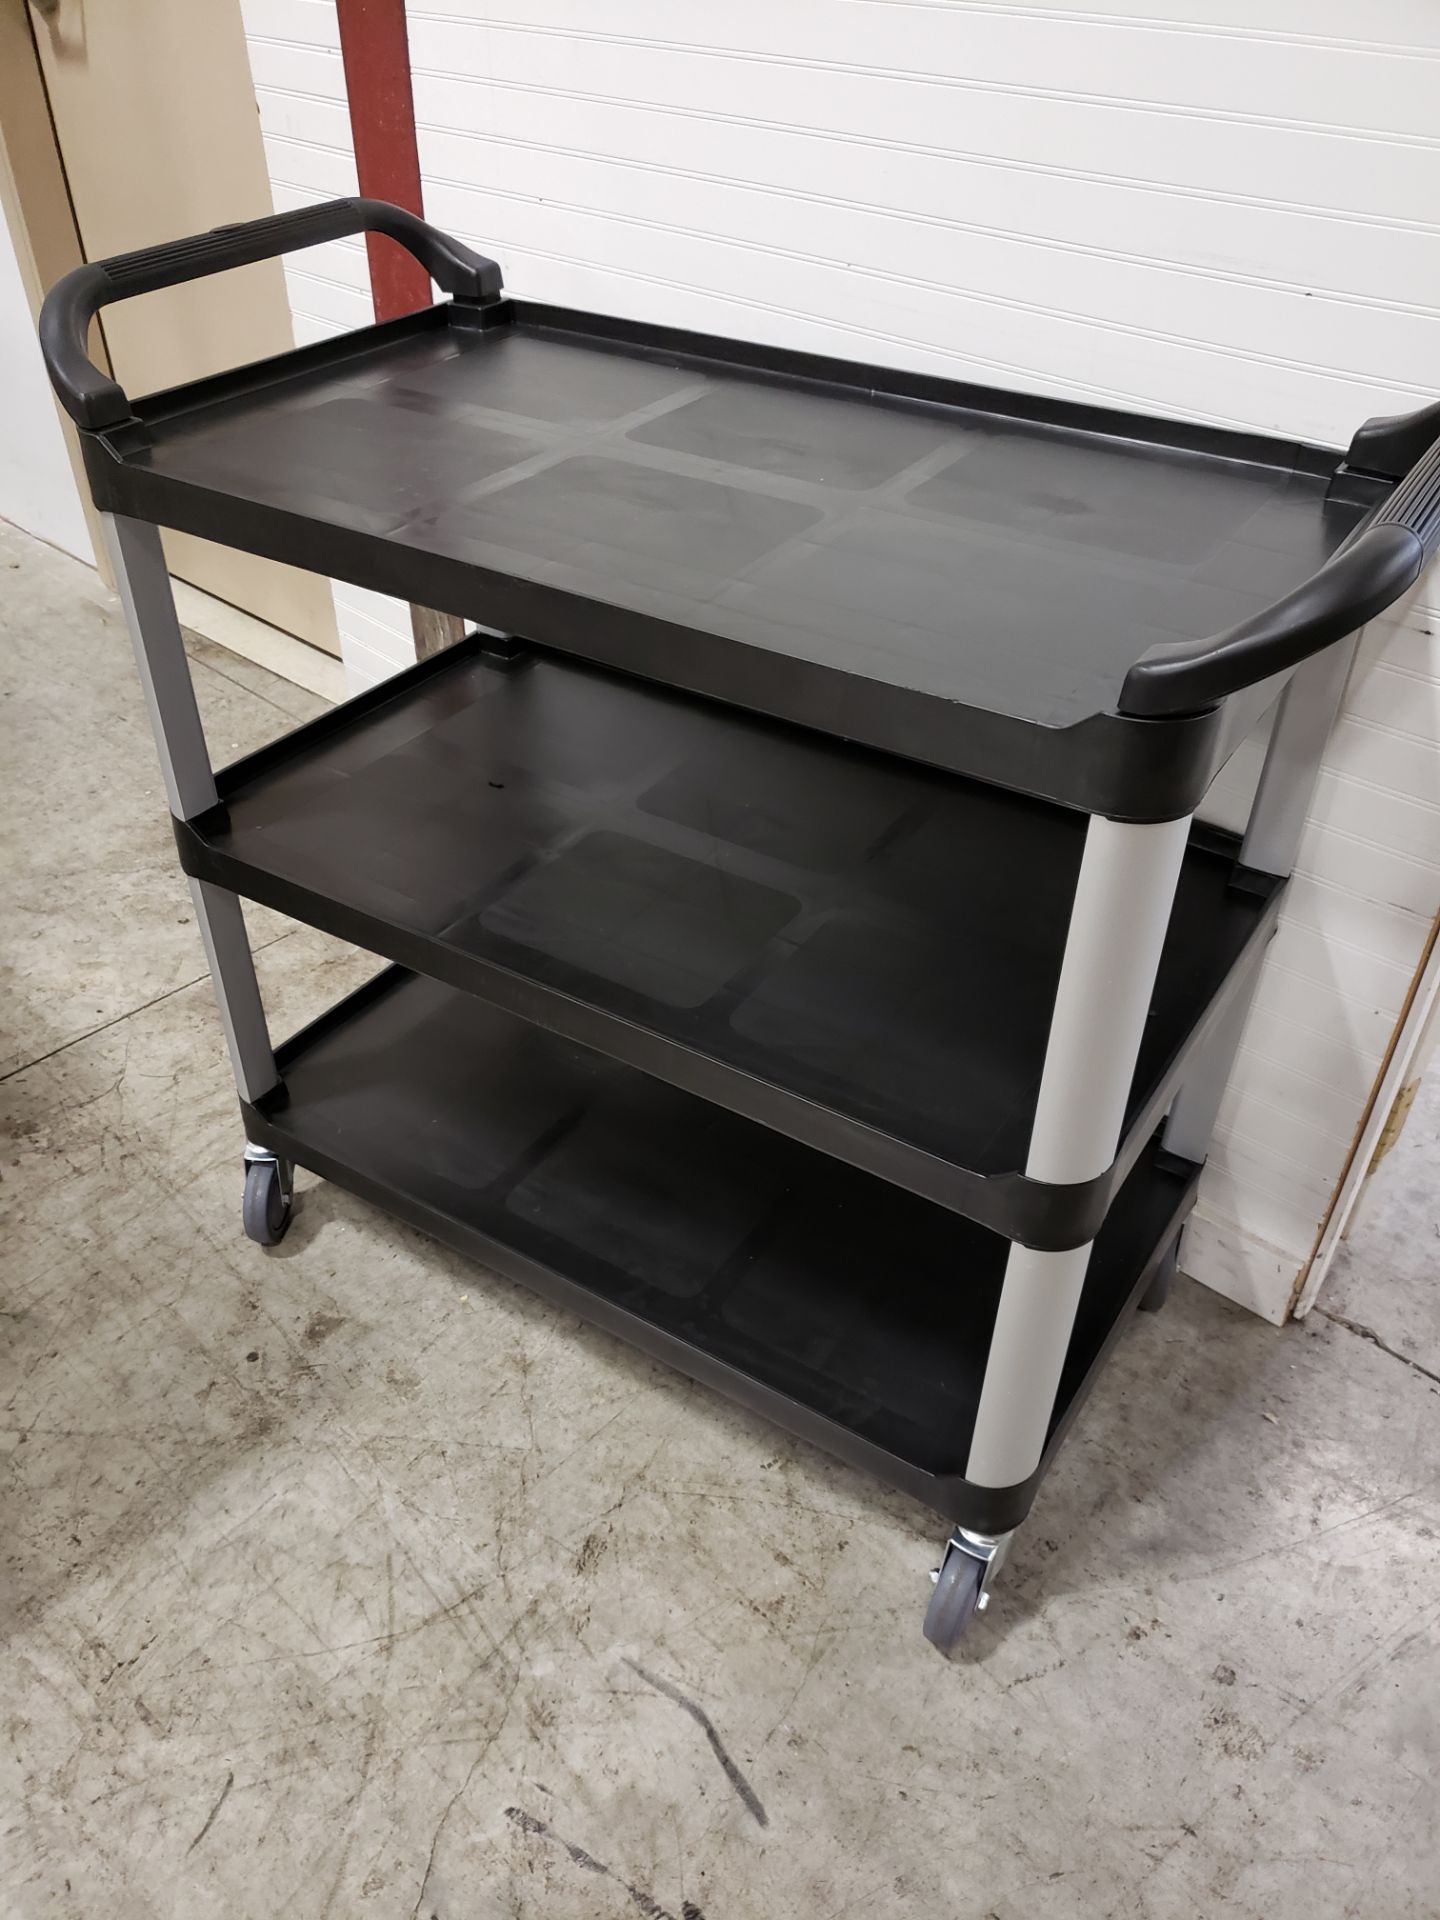 Black 3 Tier Cart with Waste Receptacle - 19.5" x 35" x 34" High on Casters